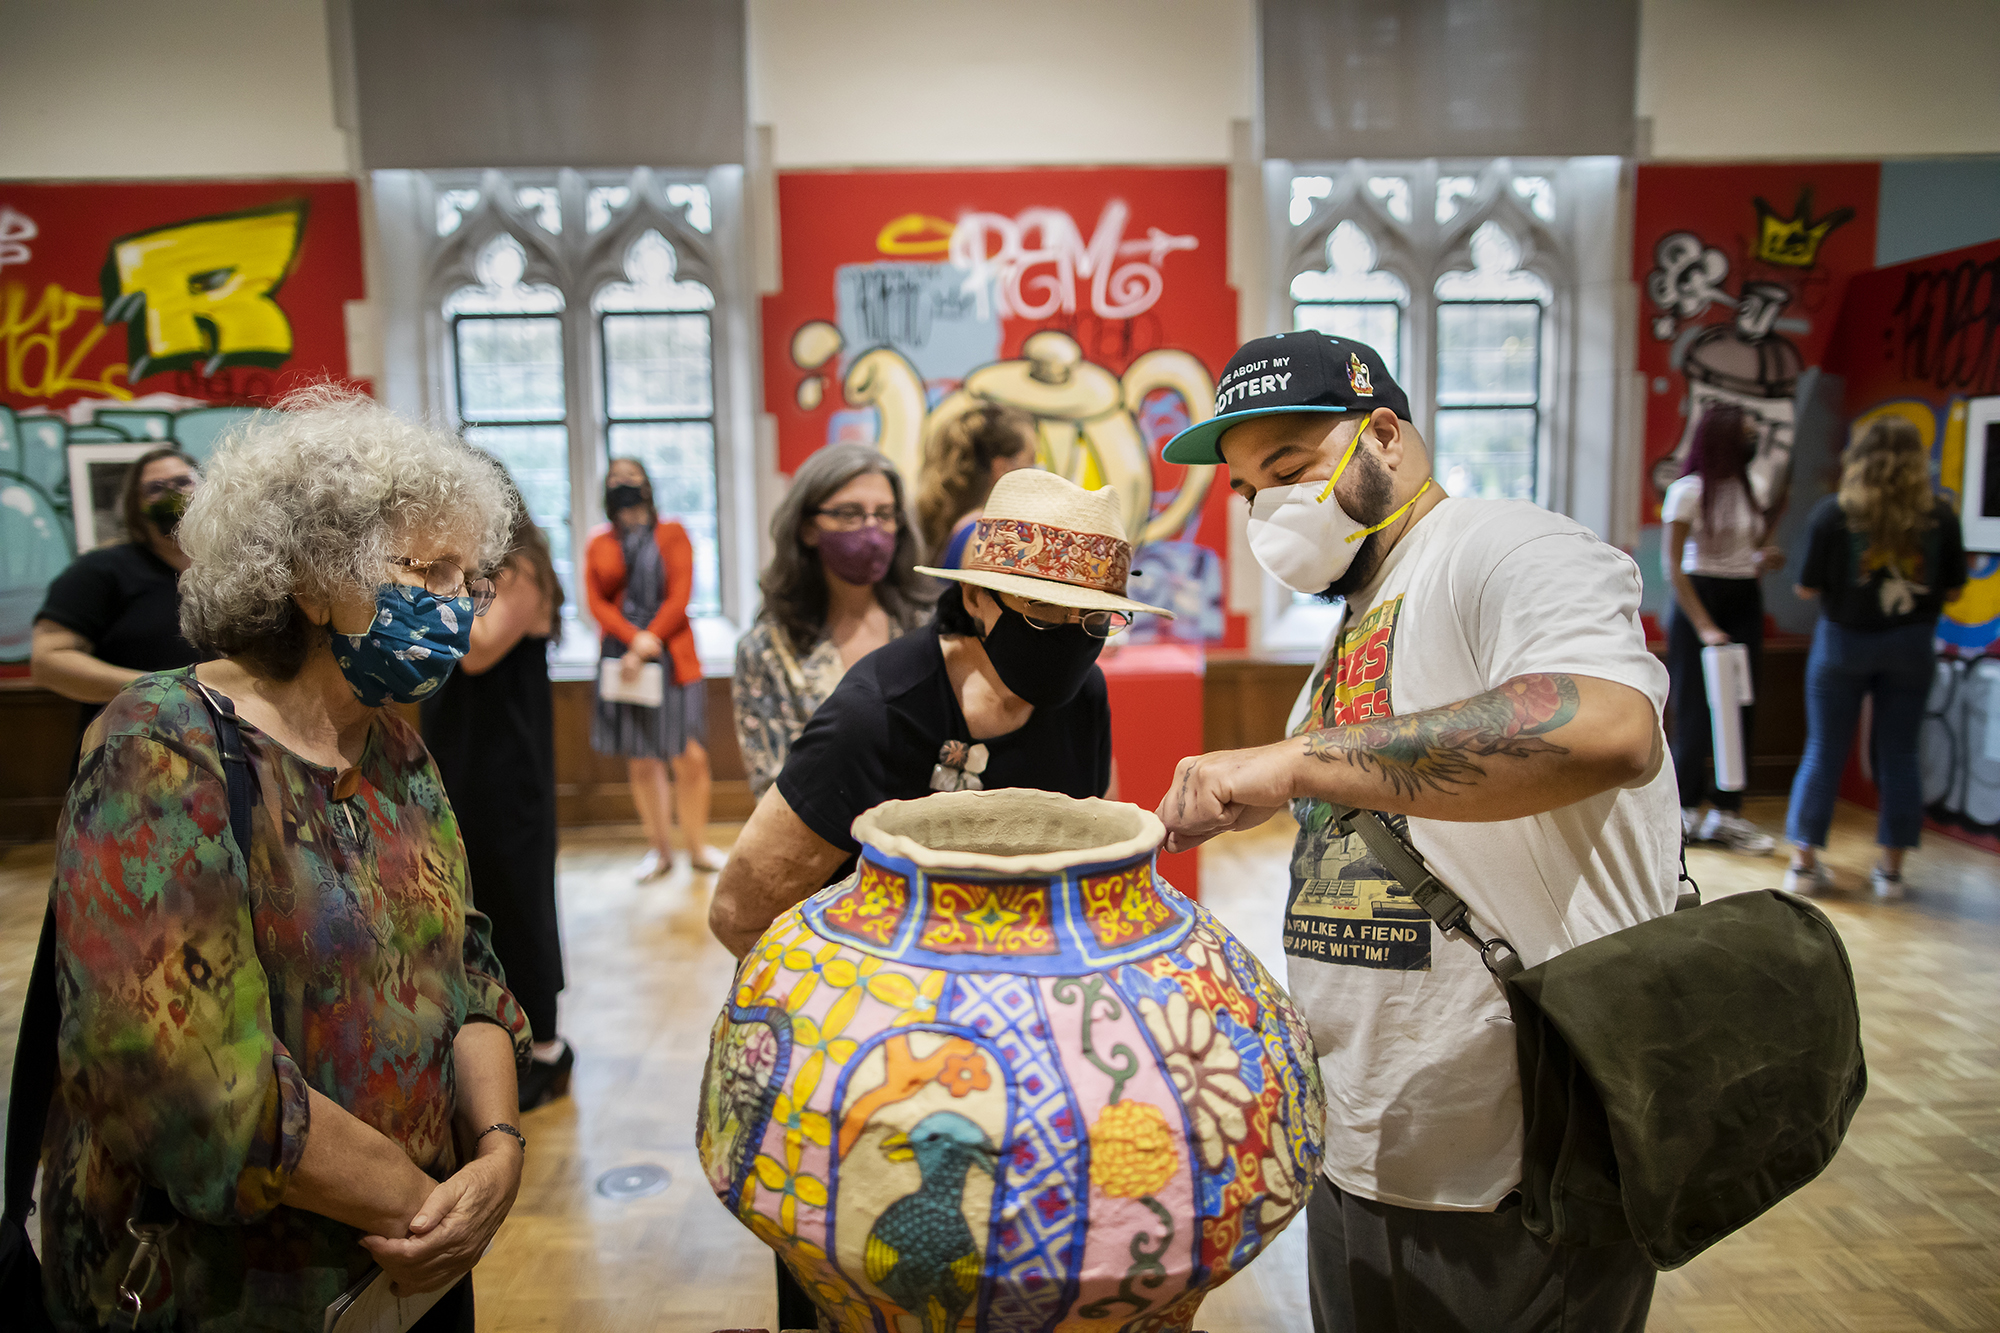 Artist pointing to painted ceramic pot while two people look and listen